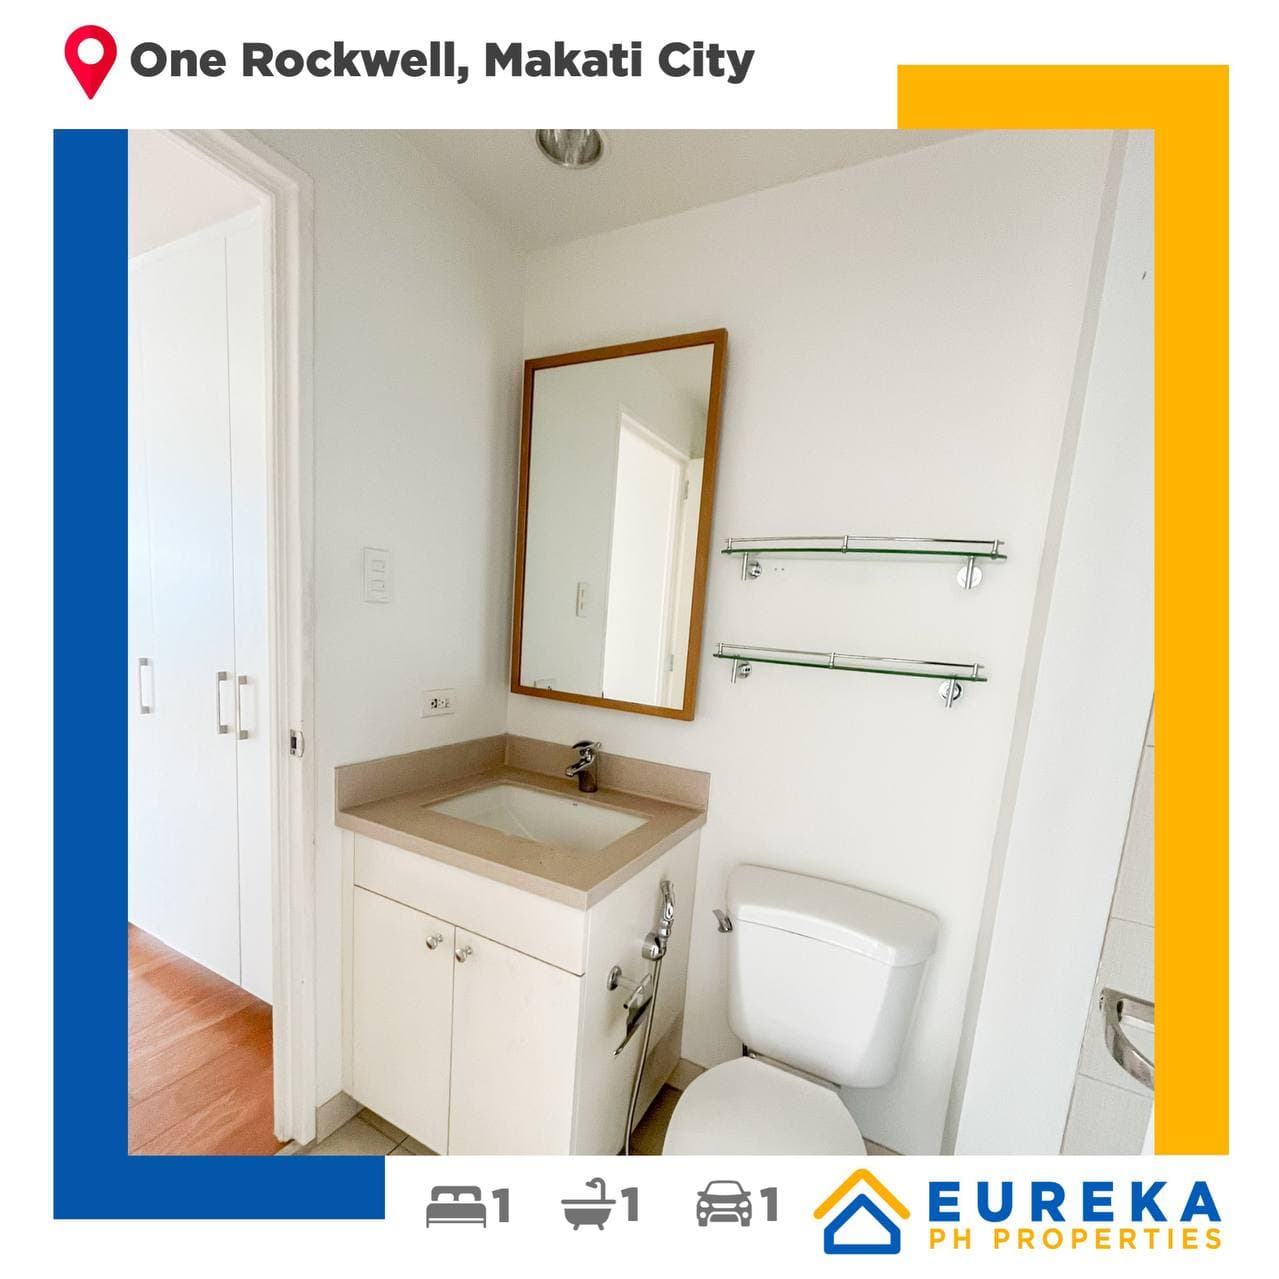 1BR 68 sqm unit at One Rockwell East Tower, Makati City.